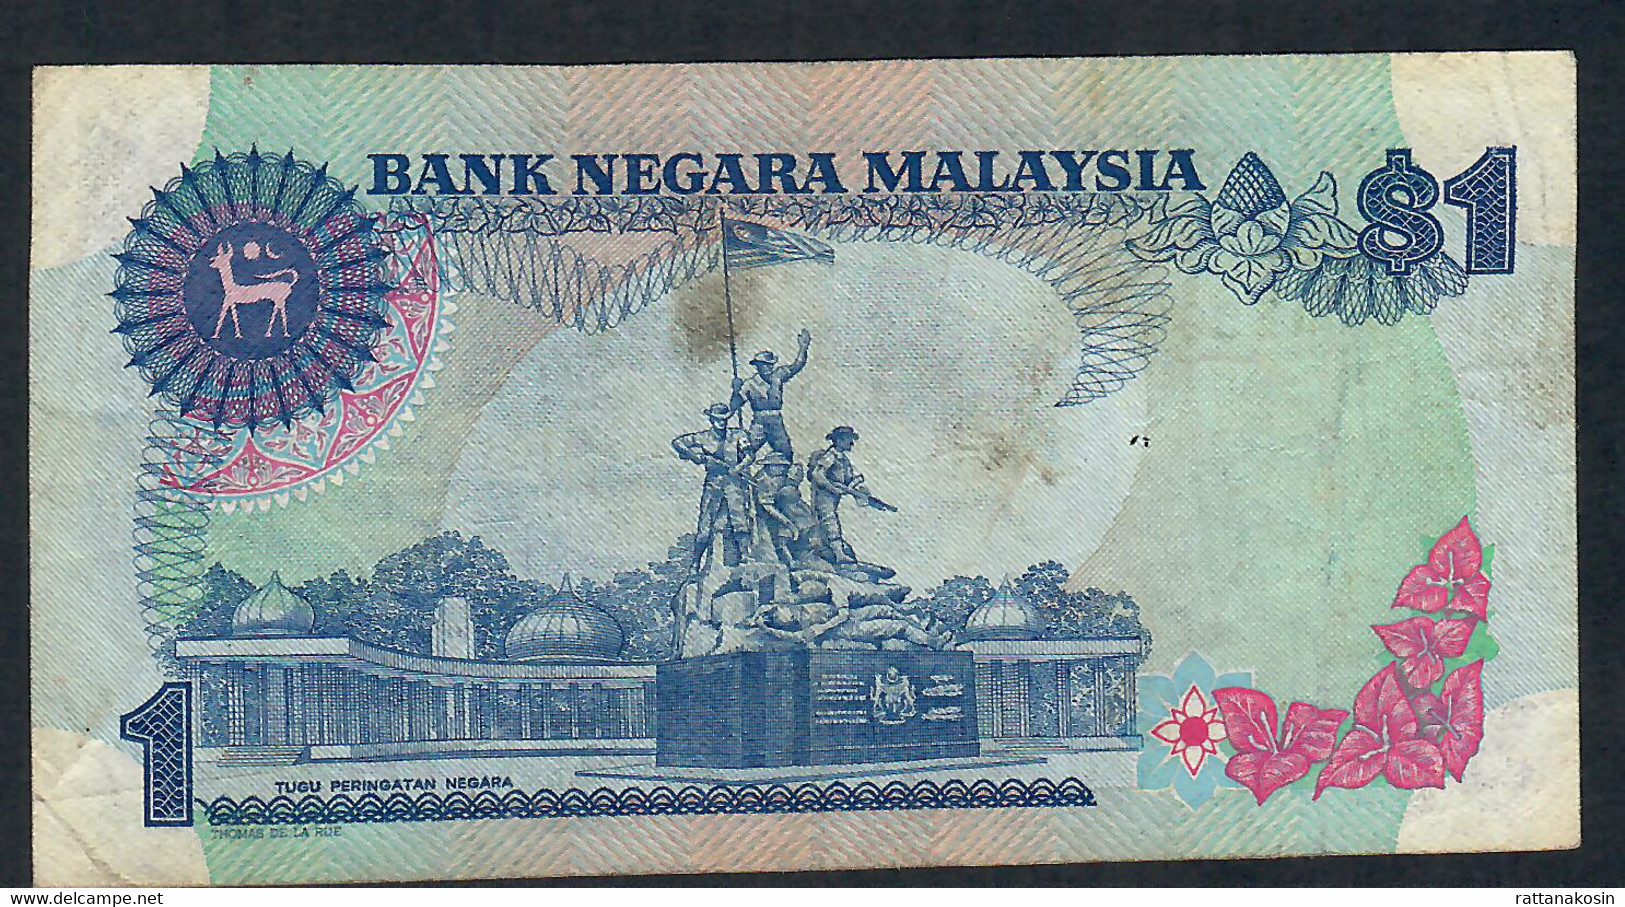 MALAYSIA  P19A 1 RINGGIT 1981 #AF  Printer TdlR RARE VARIETY  FINE++/Better  NO P.h.  ! ! - Malaysia